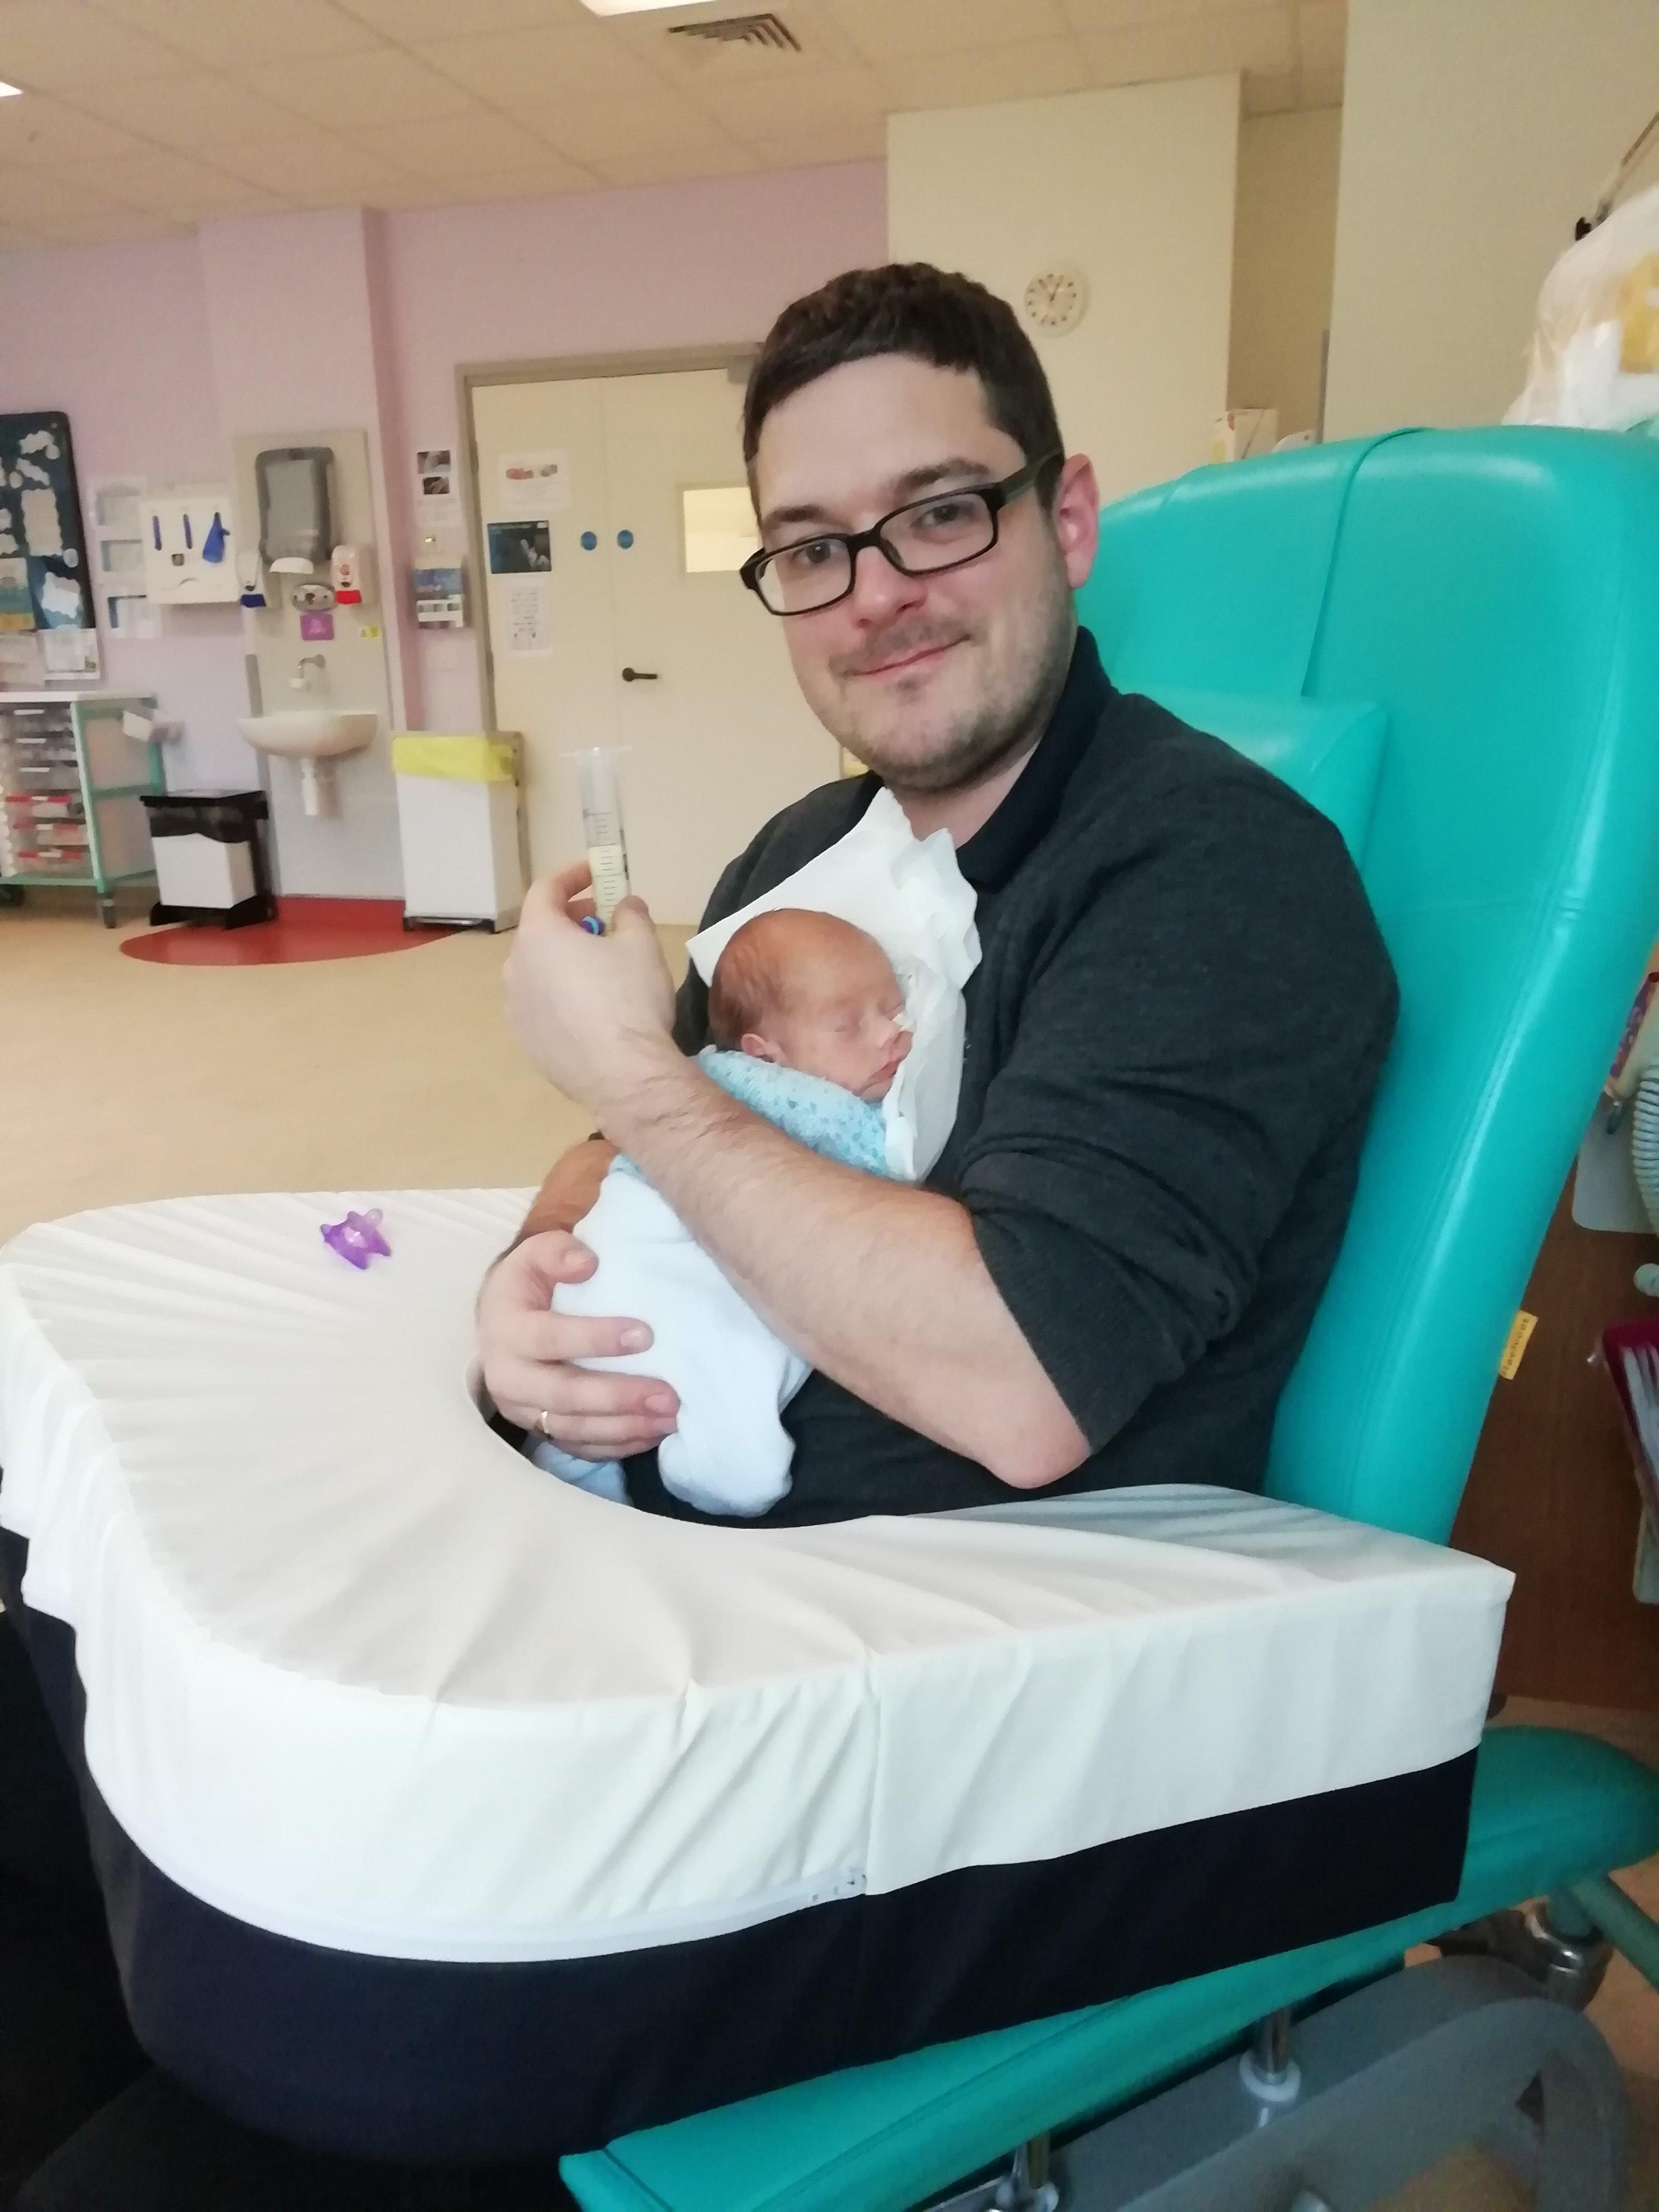 Cheryl Carter and Chris Pegrum from Yapton have triplets: Violet, Frank, and William. Chris, 33, from Blenheim Road, Yapton, with one of the trio